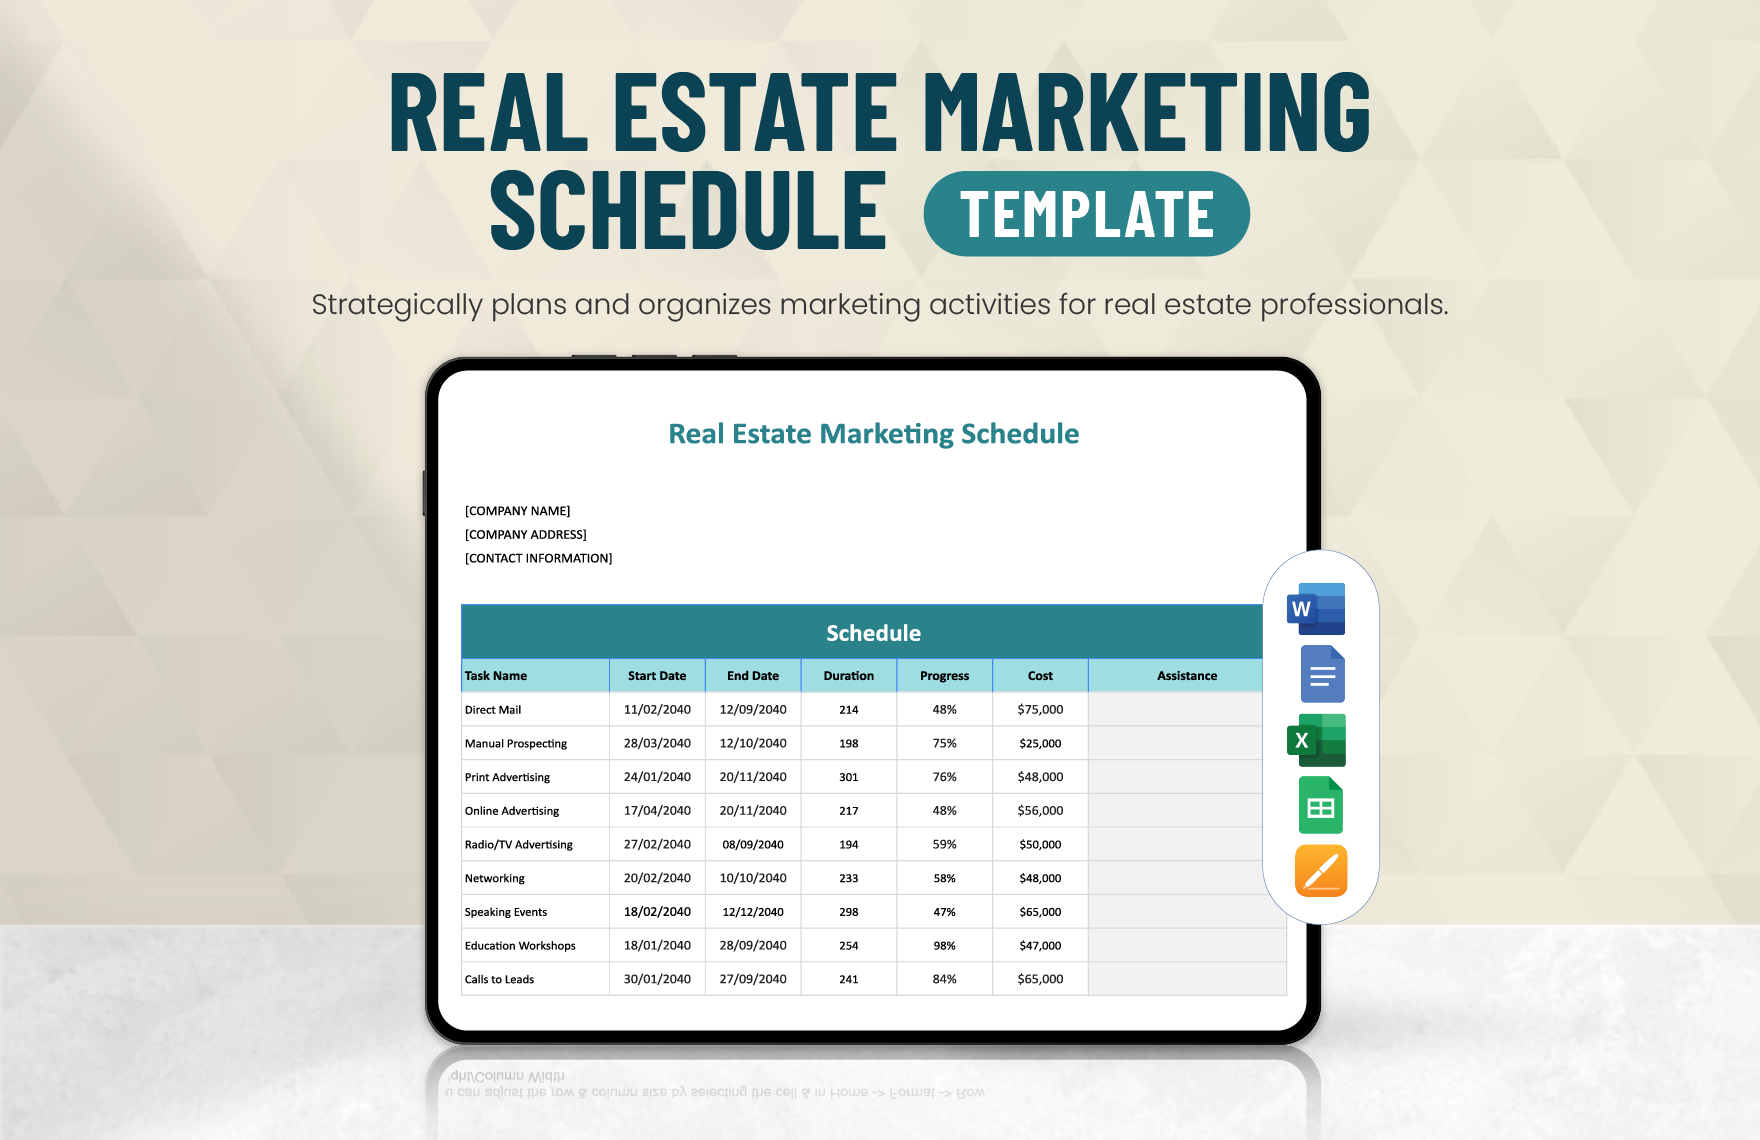 Real Estate Marketing Schedule Template in Word, Google Docs, Excel, Google Sheets, Apple Pages